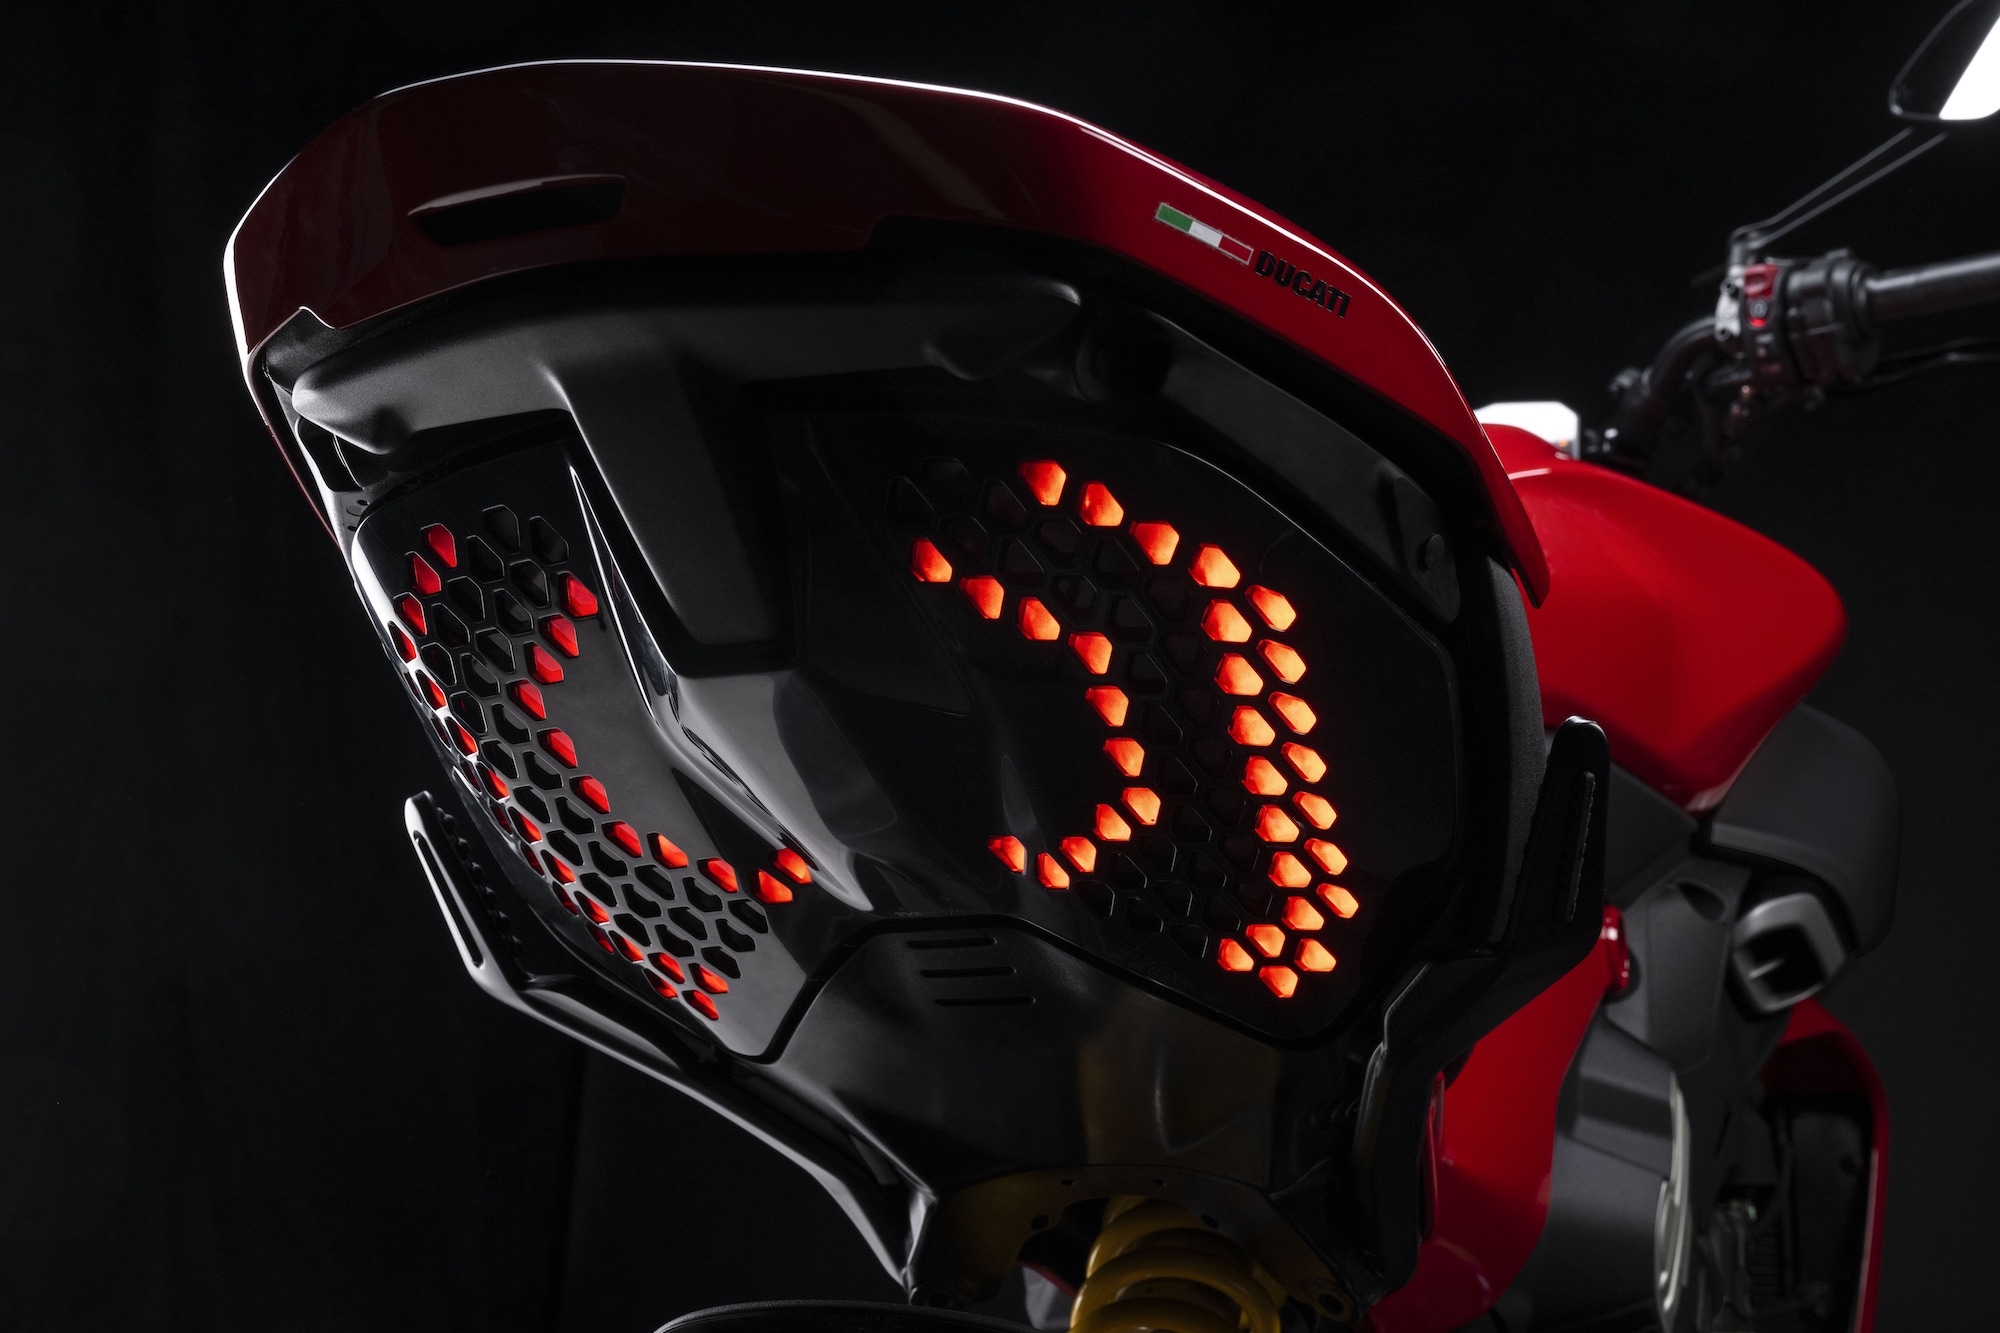 2023 Ducati World Première: Ep. 6, ‘Dare to be Bold’ with the Diavel V4 - seen above. Media sourced from Ducati's press release.